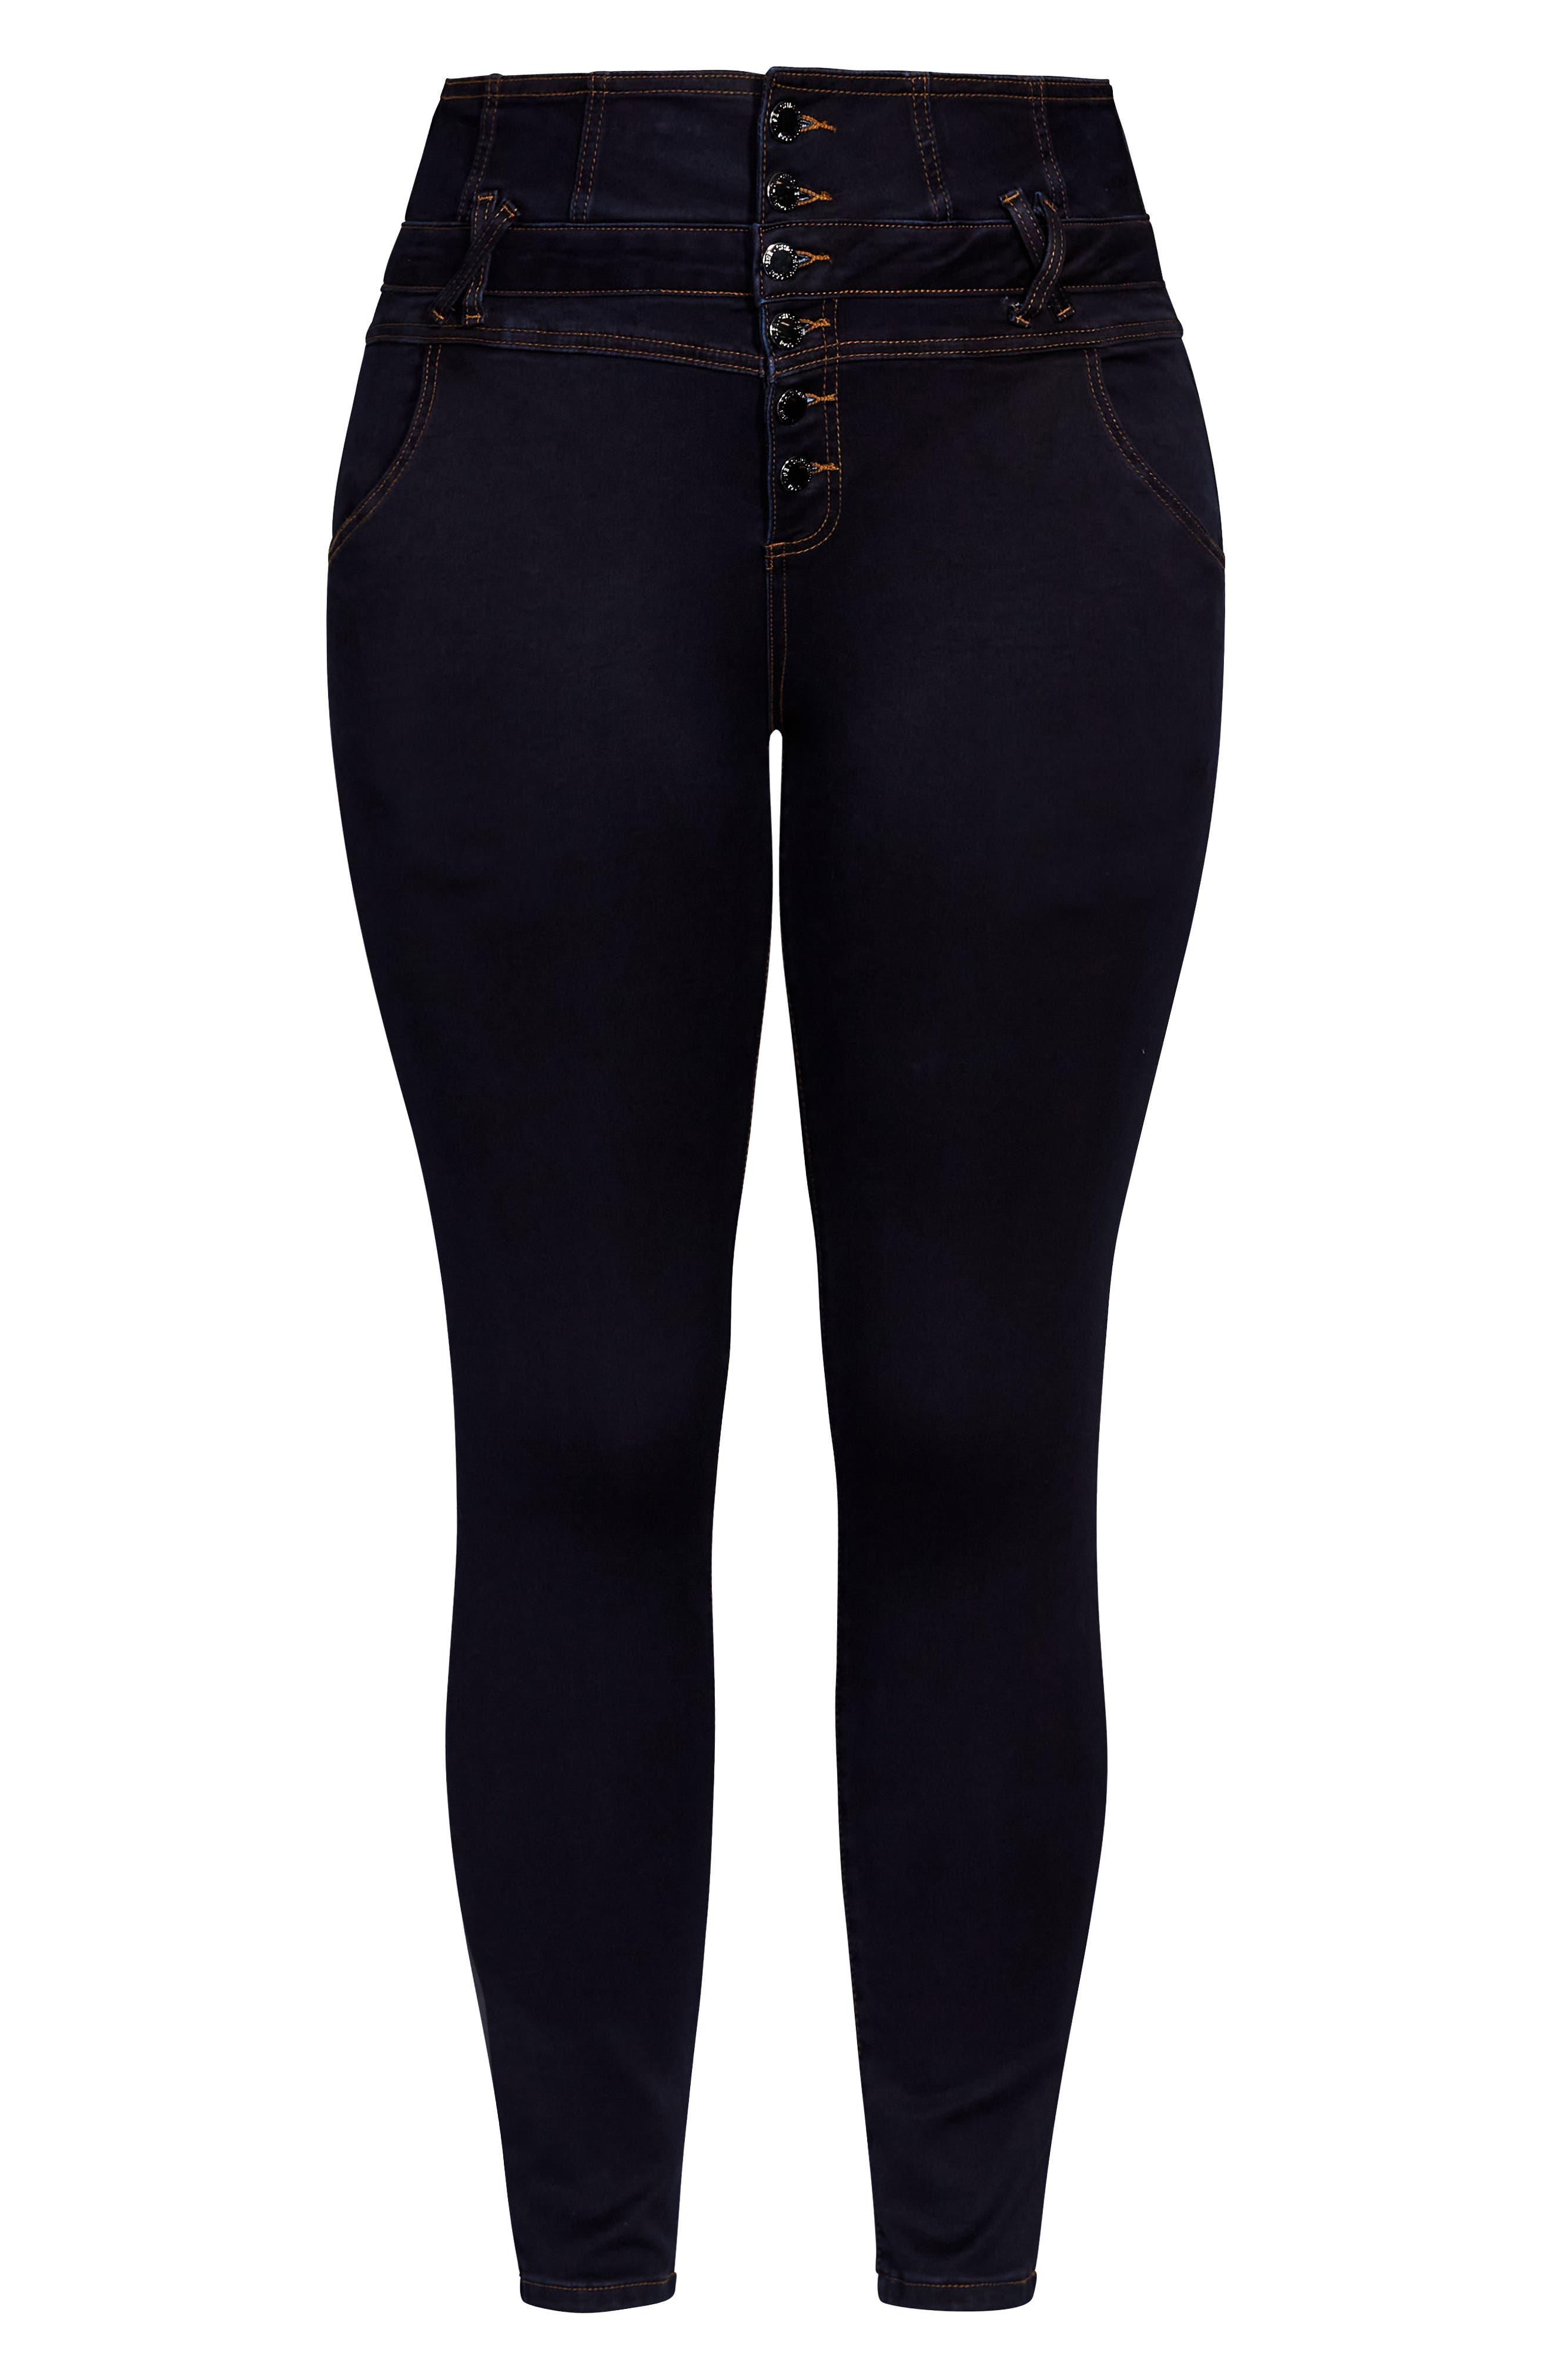 City Chic Harley Corset High Waist Skinny Jeans in Blue | Lyst